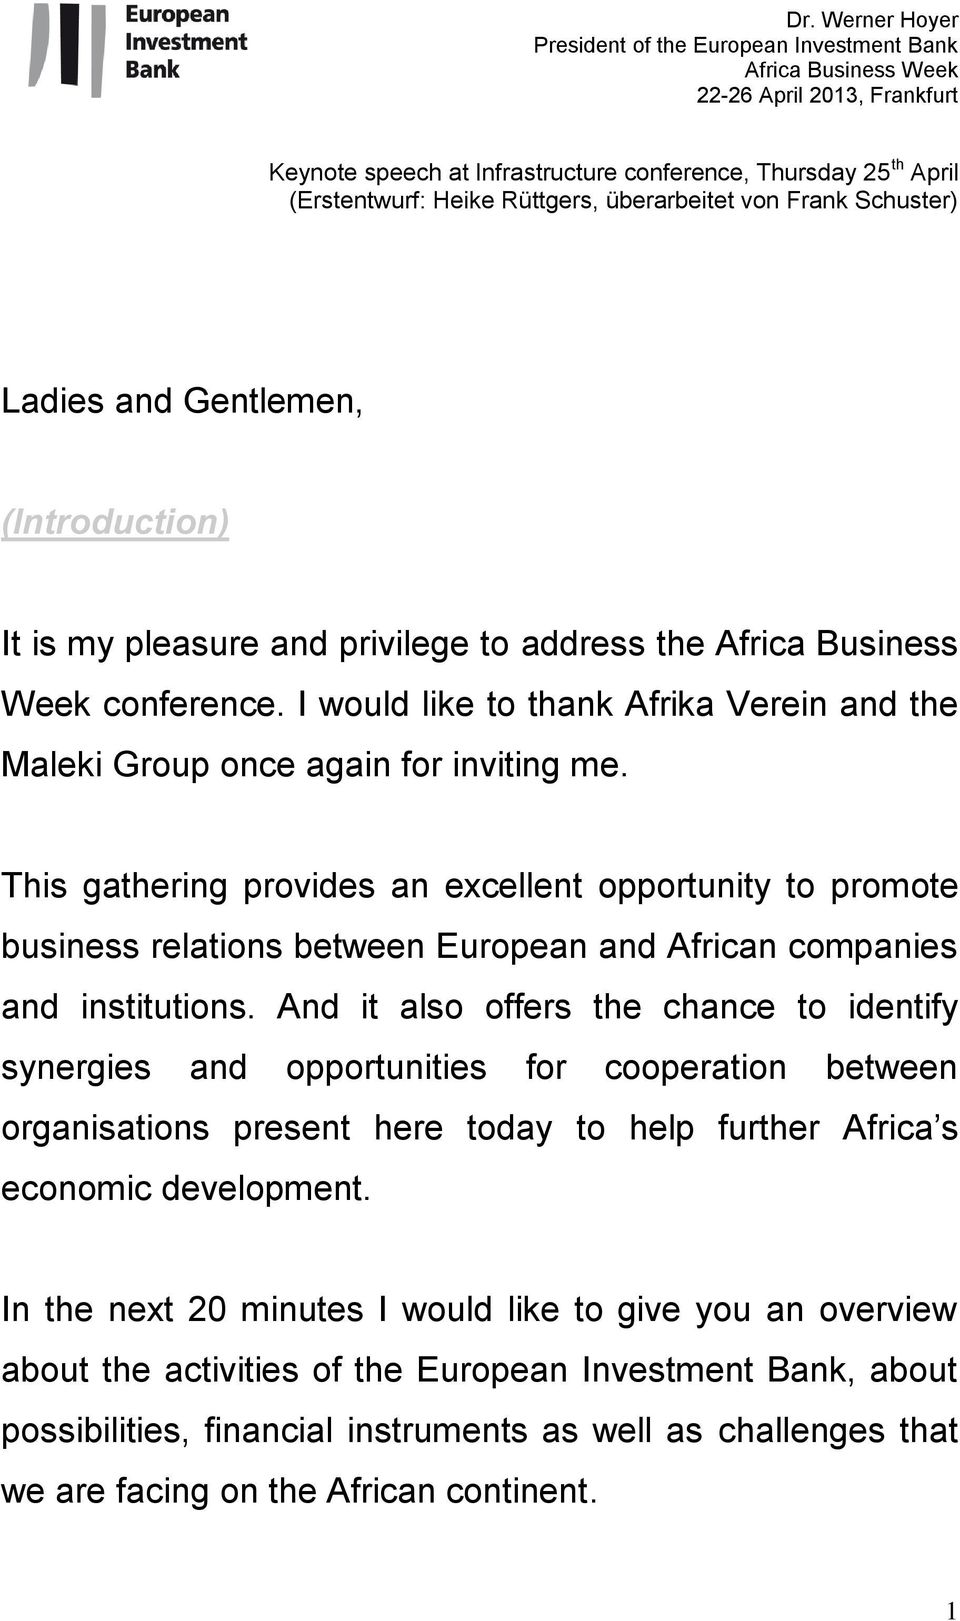 I would like to thank Afrika Verein and the Maleki Group once again for inviting me.